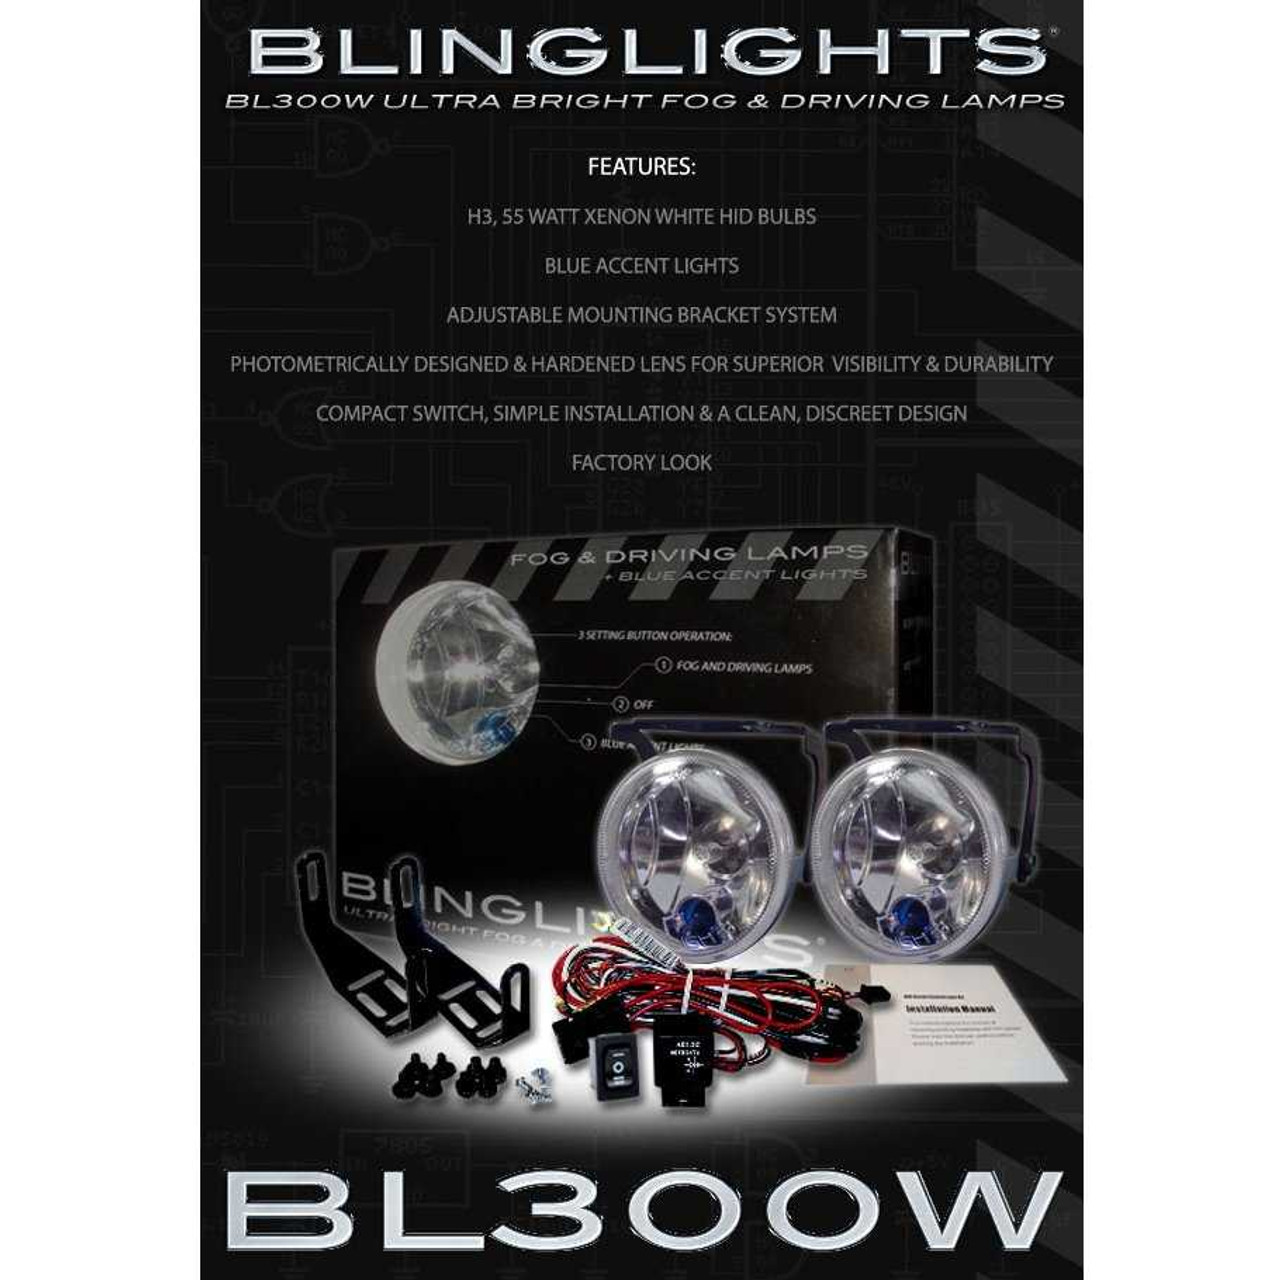 2003 2004 Land Rover Discovery 2 Fog Lamp Driving Light Kit Series II Foglamps LR2 Drivinglights